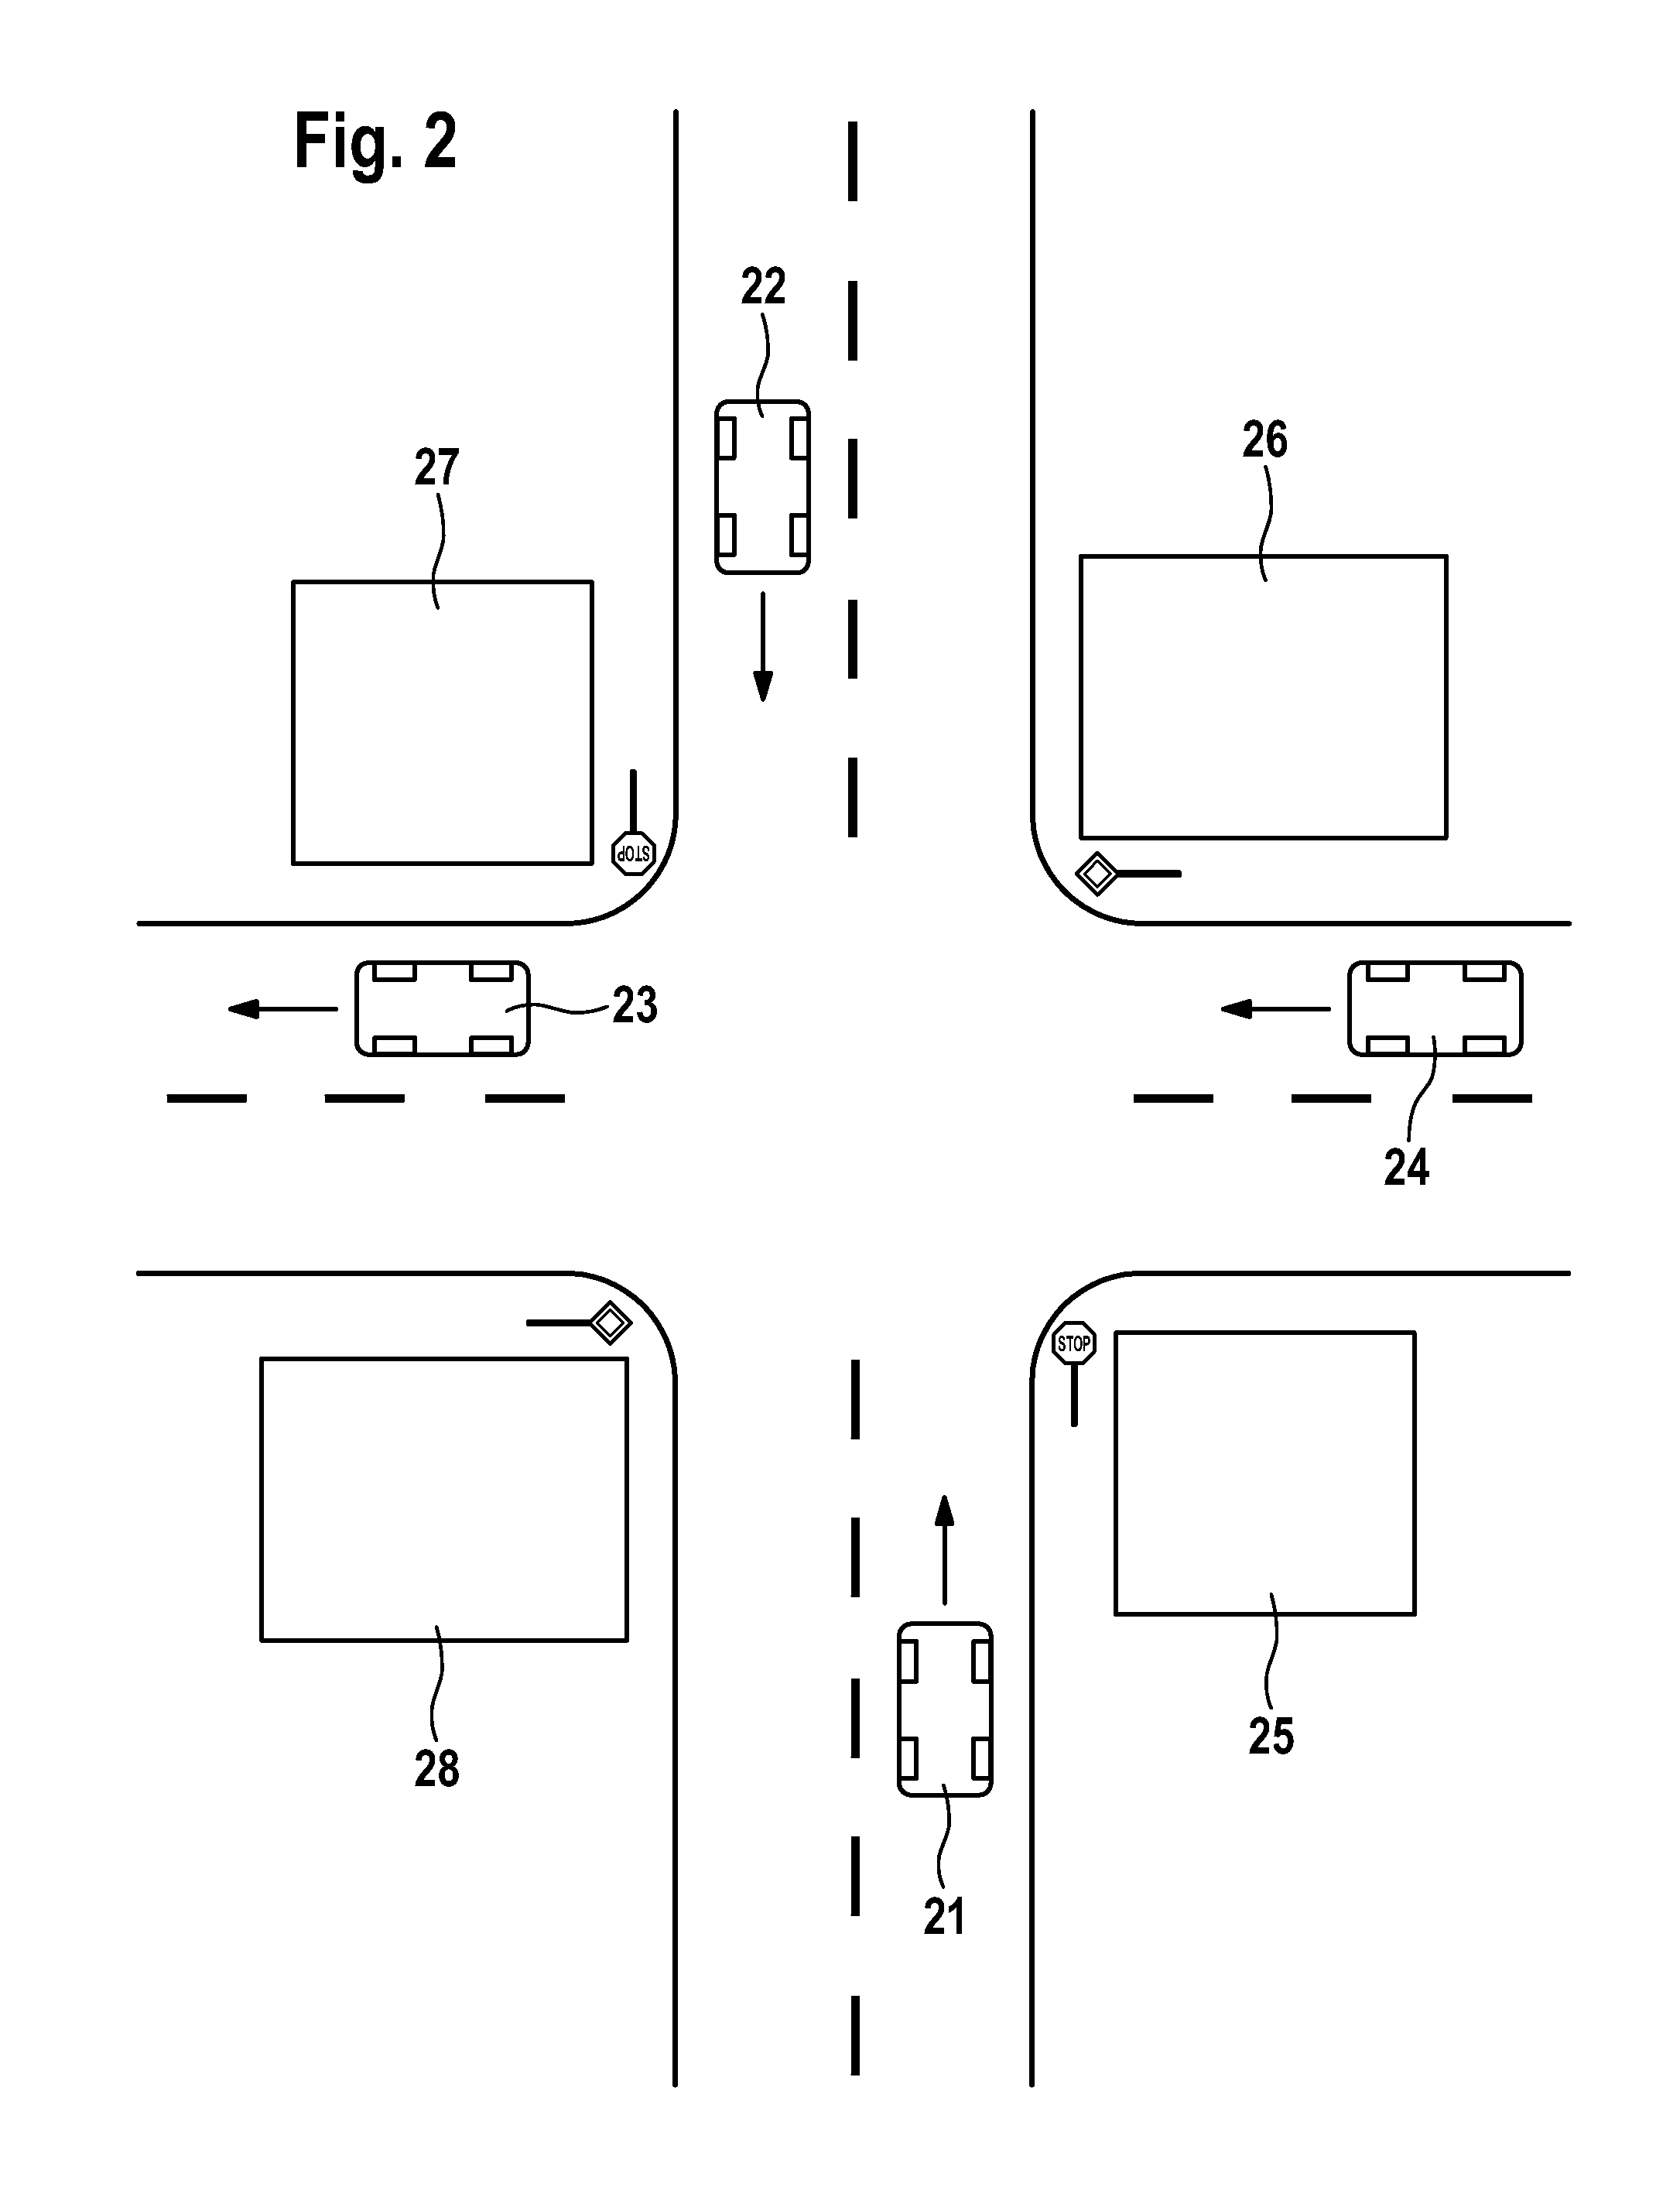 Visual Driver Information and Warning System for a Driver of a Motor Vehicle